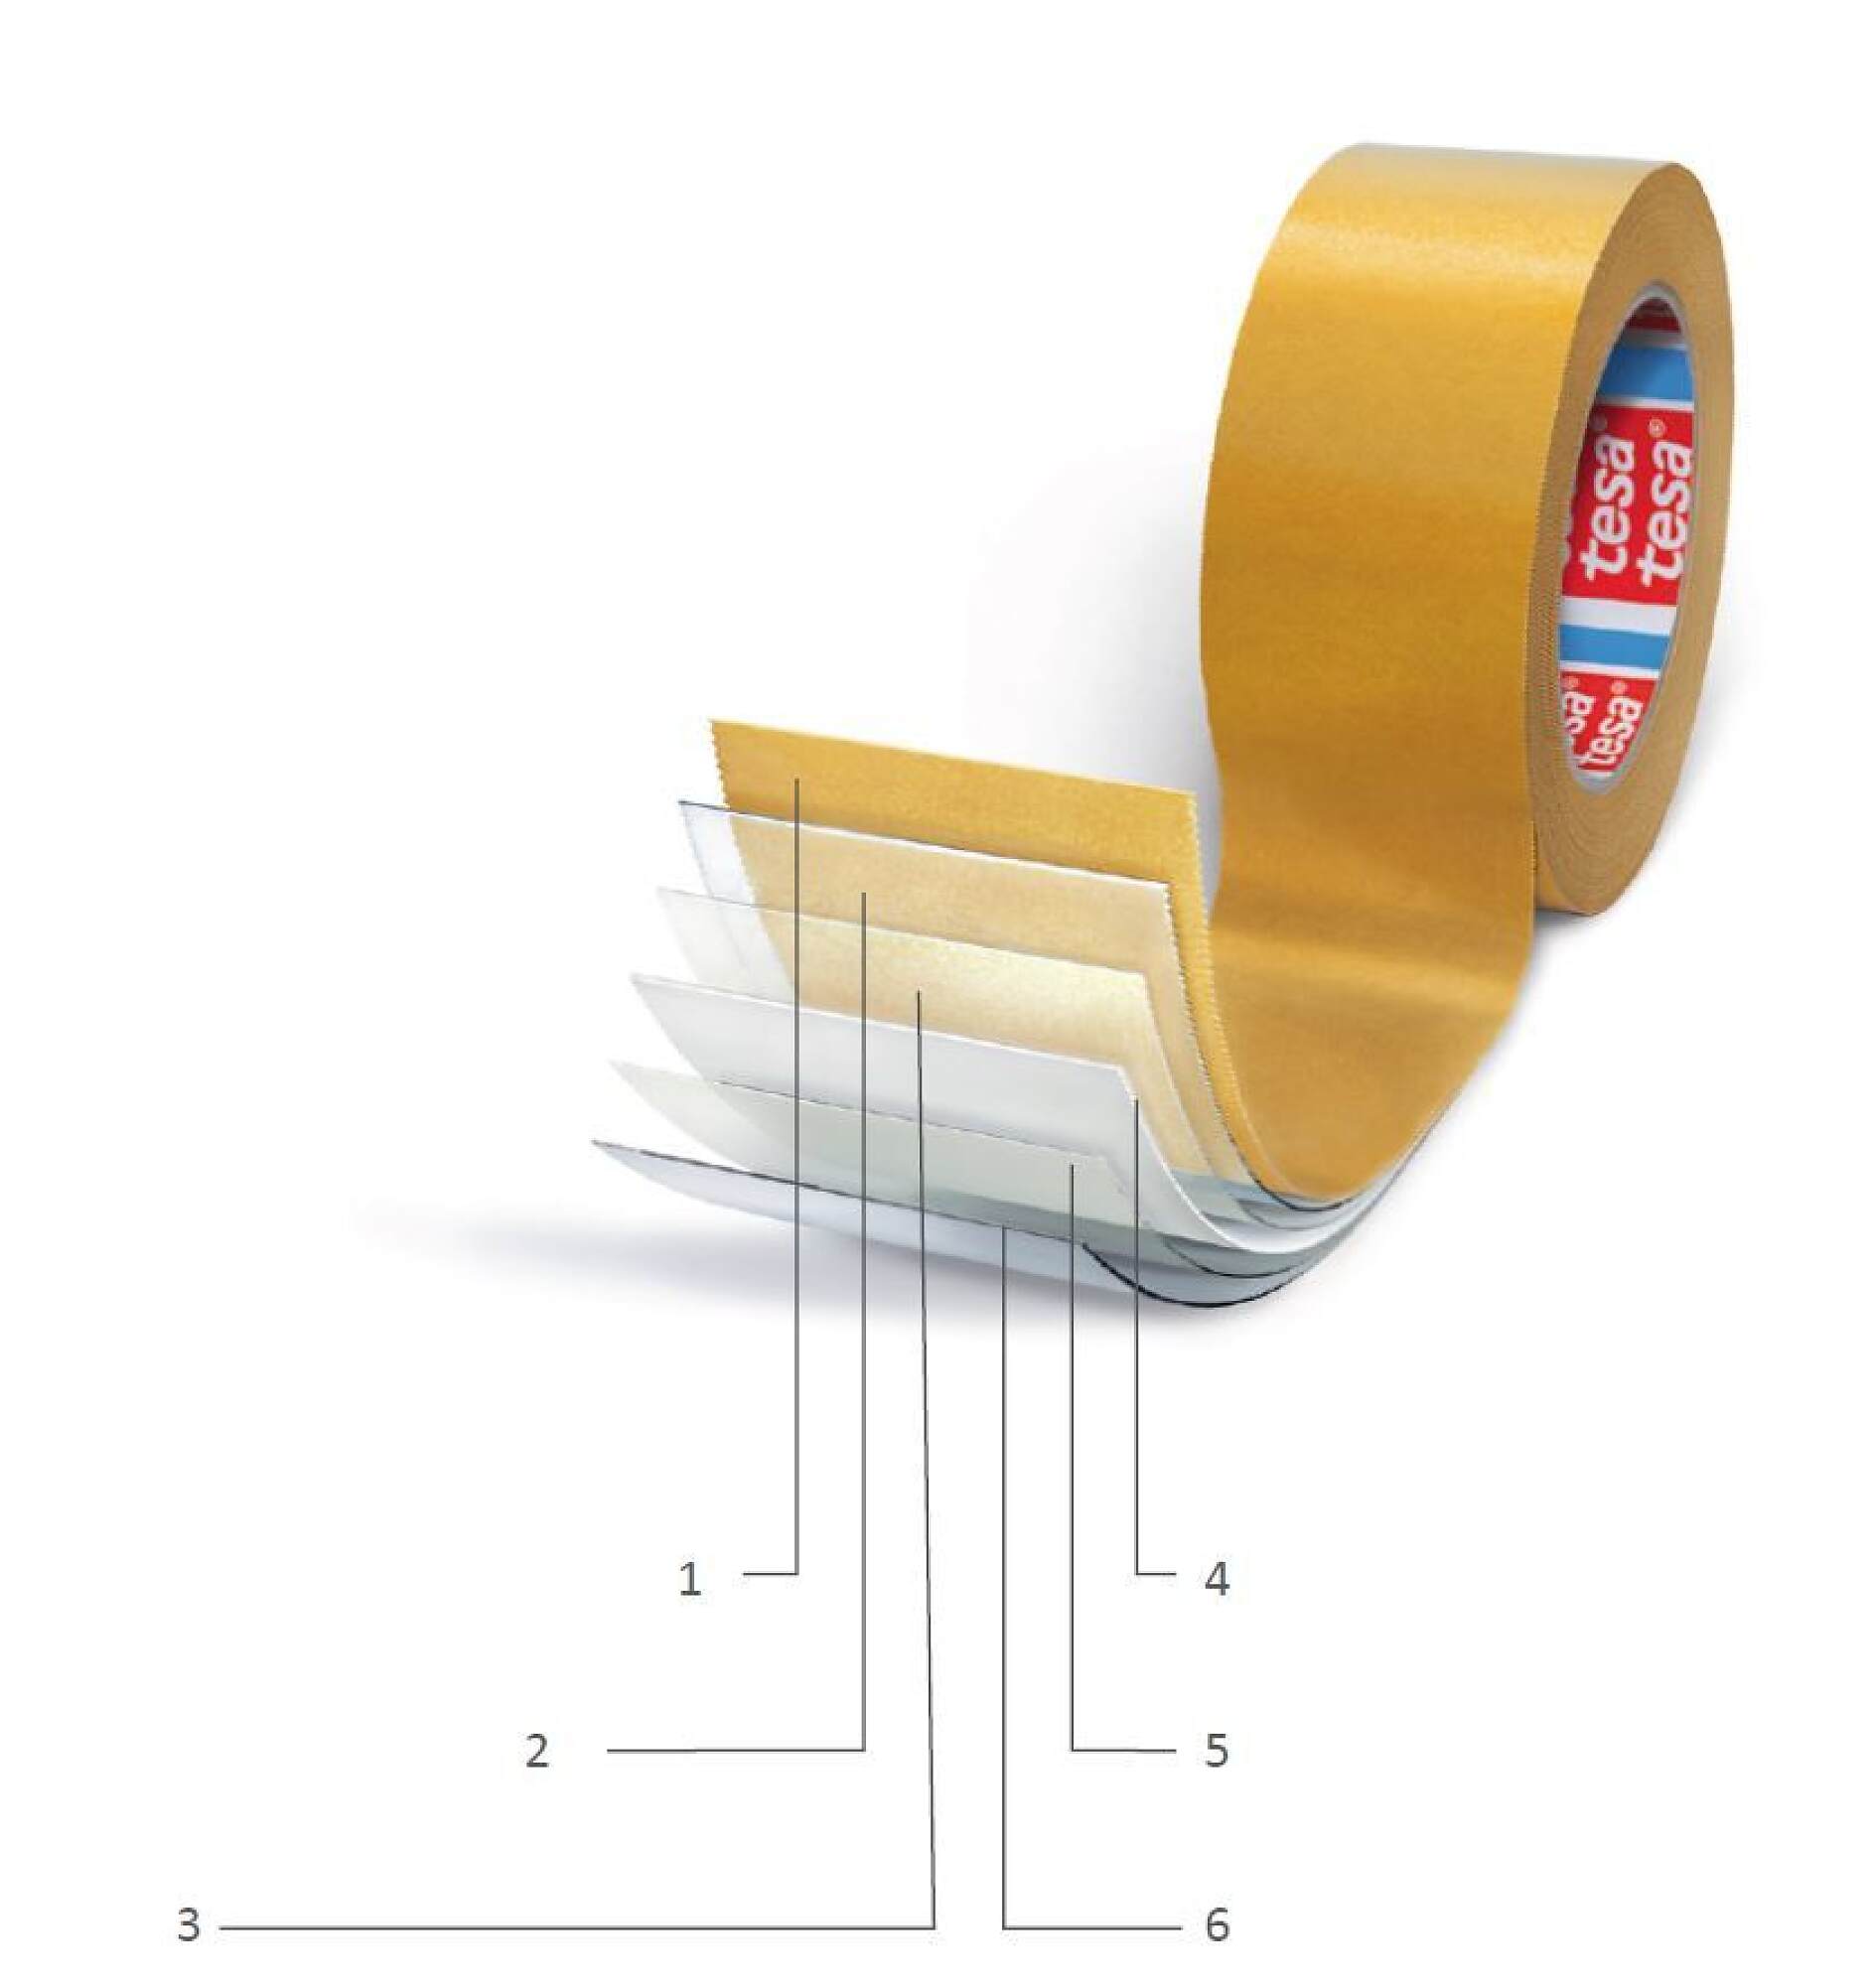 double sided velcro tape, double sided velcro tape Suppliers and  Manufacturers at